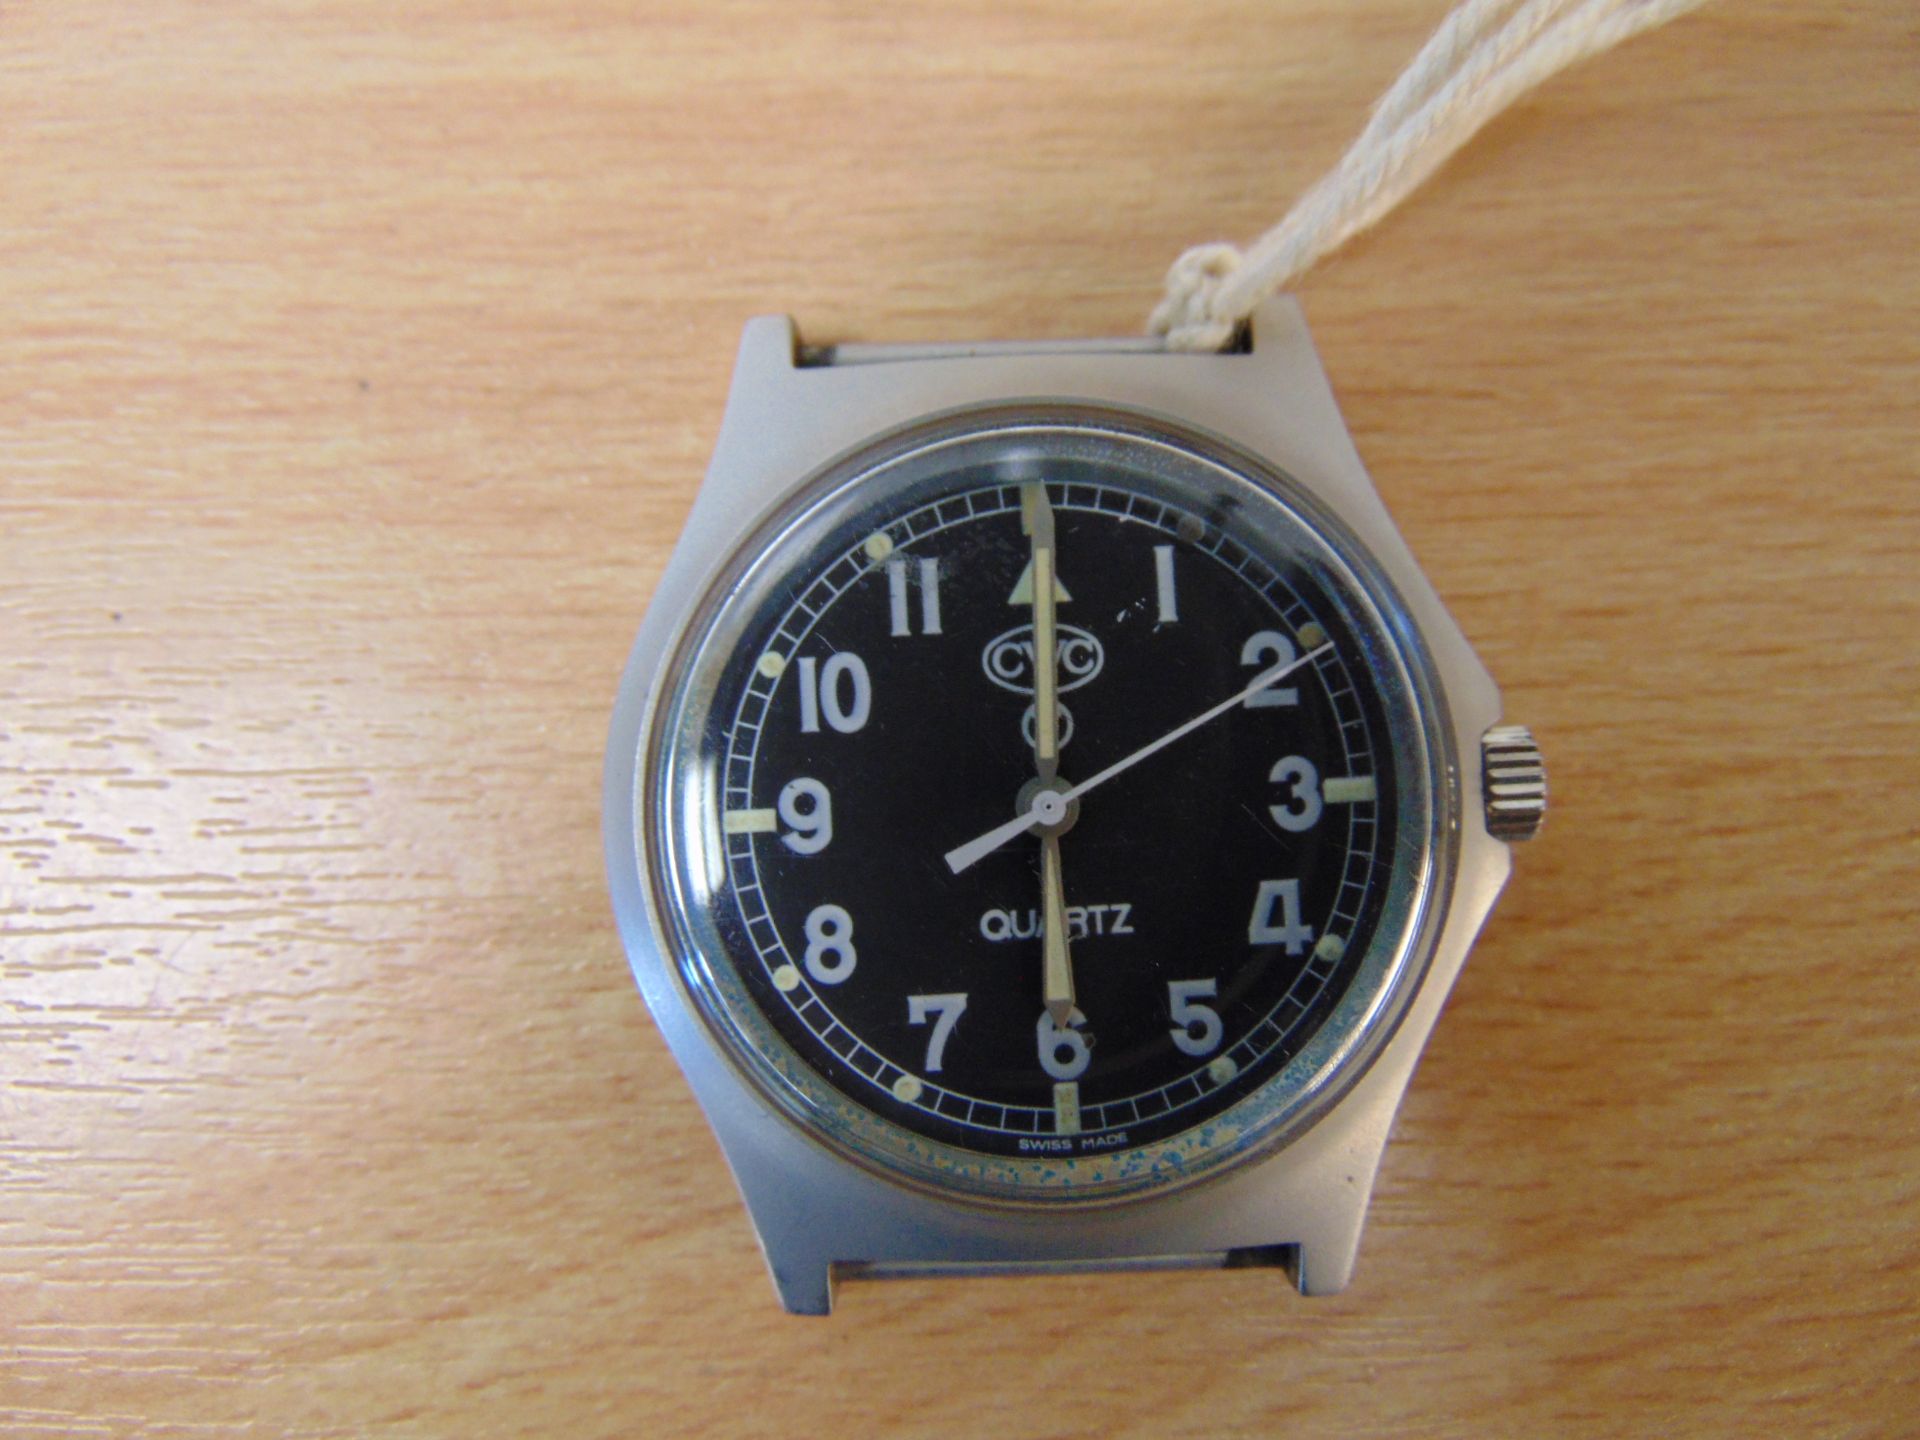 CWC 0552 Royal Navy Marines Service Watch, Nato Marks, Date 1989, * Pre Gulf War 1 * - Image 2 of 4